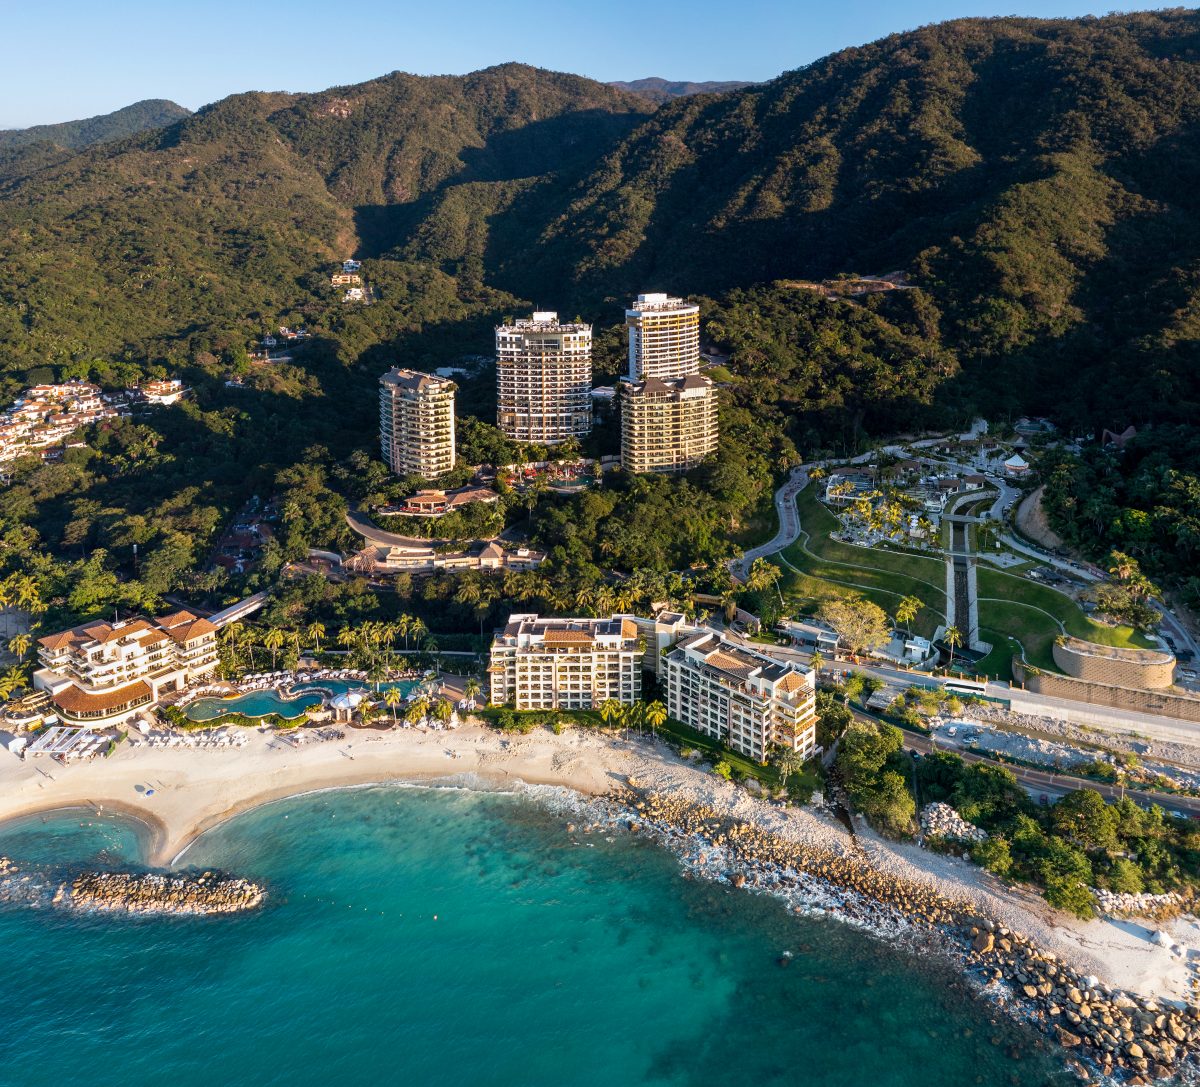 Hotel Mousai, the perfect place to stay at during a spring travel to Puerto Vallarta